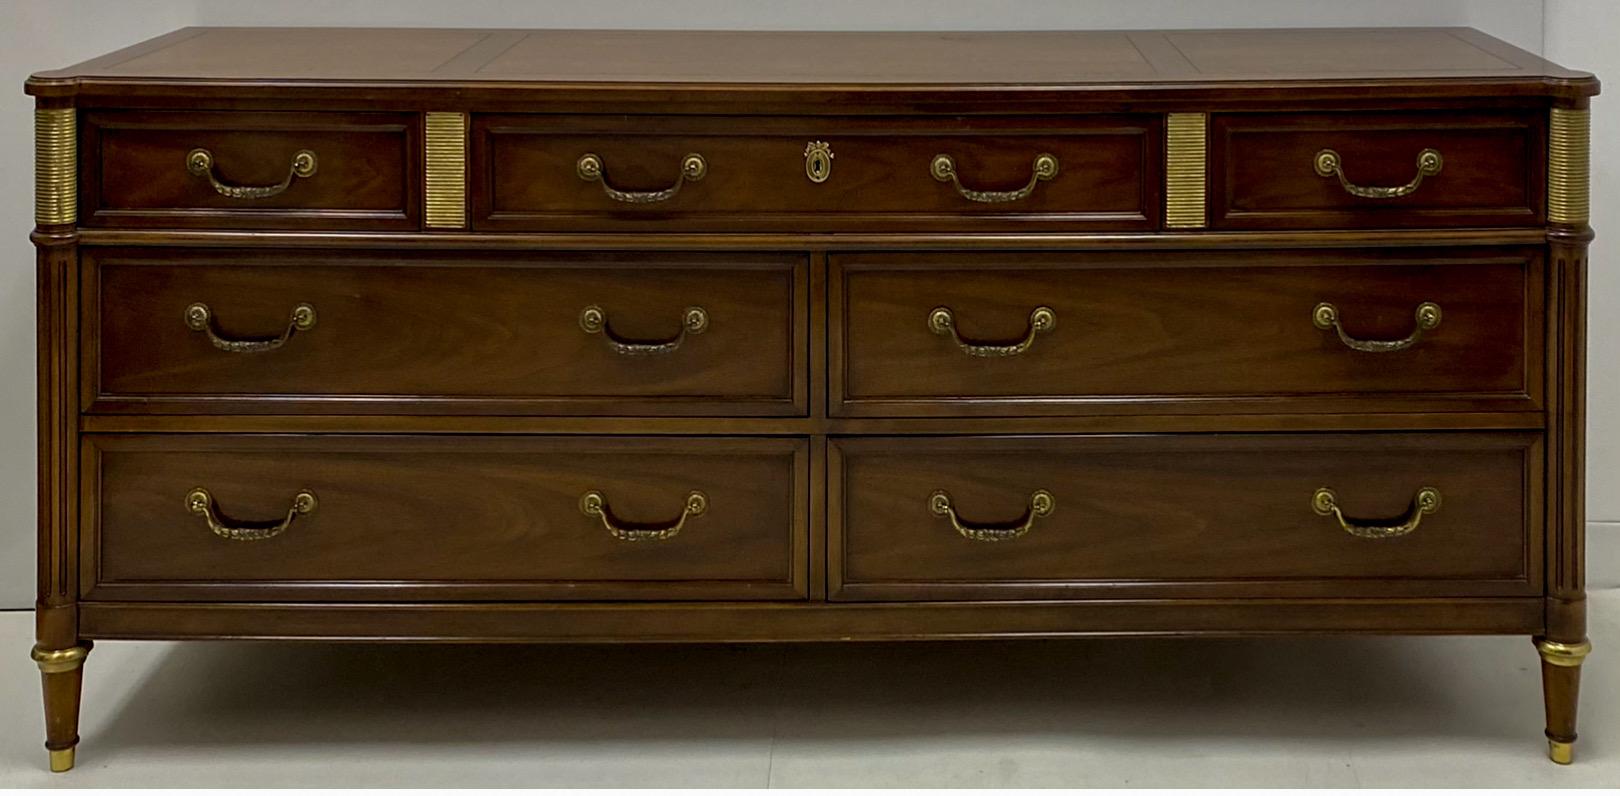 20th Century Louis XVI Style Mahogany Commode or Chest by Baker Furniture